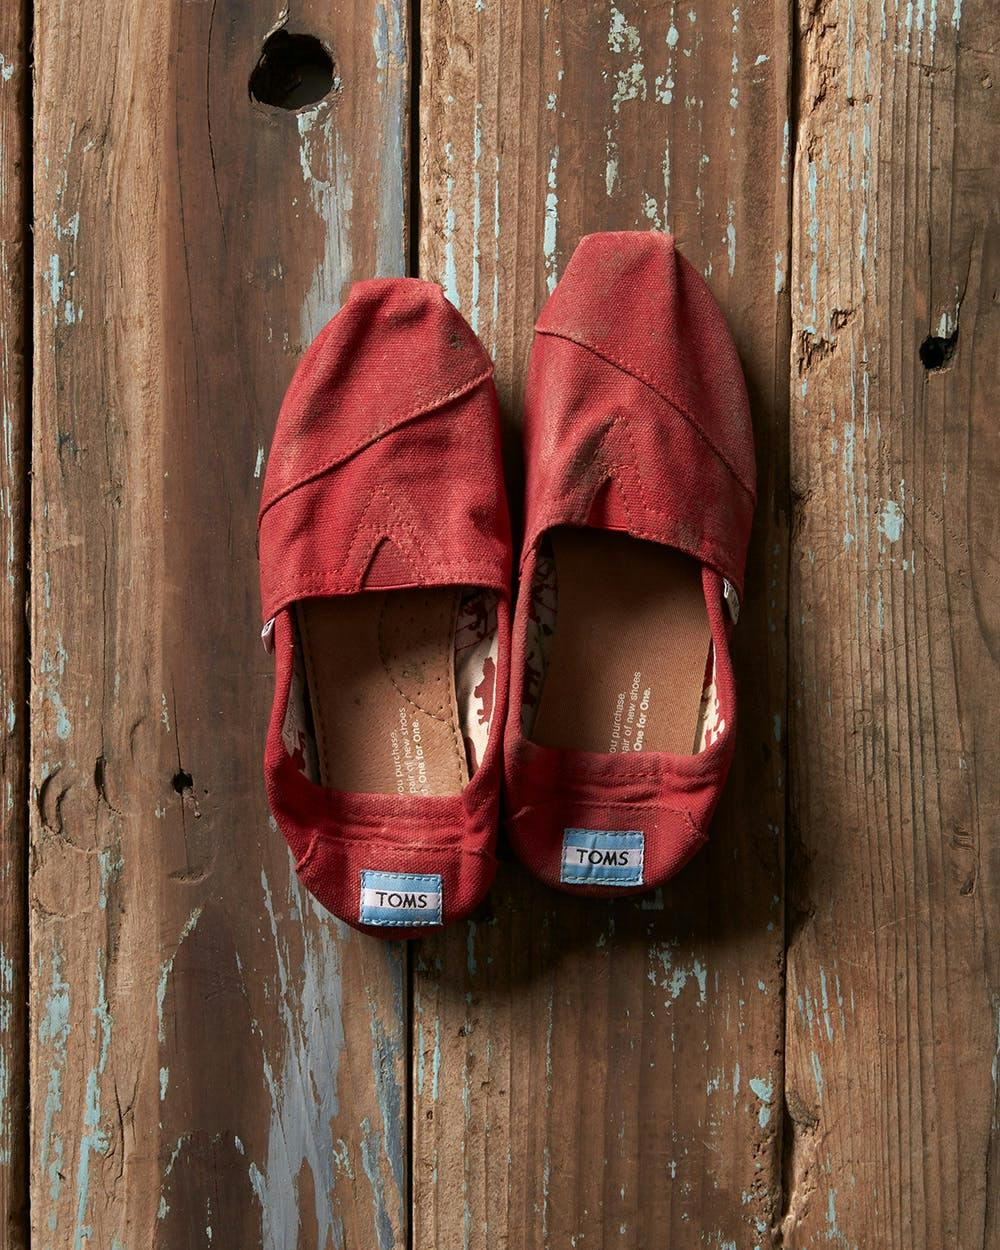 Toms red shoes product photography 